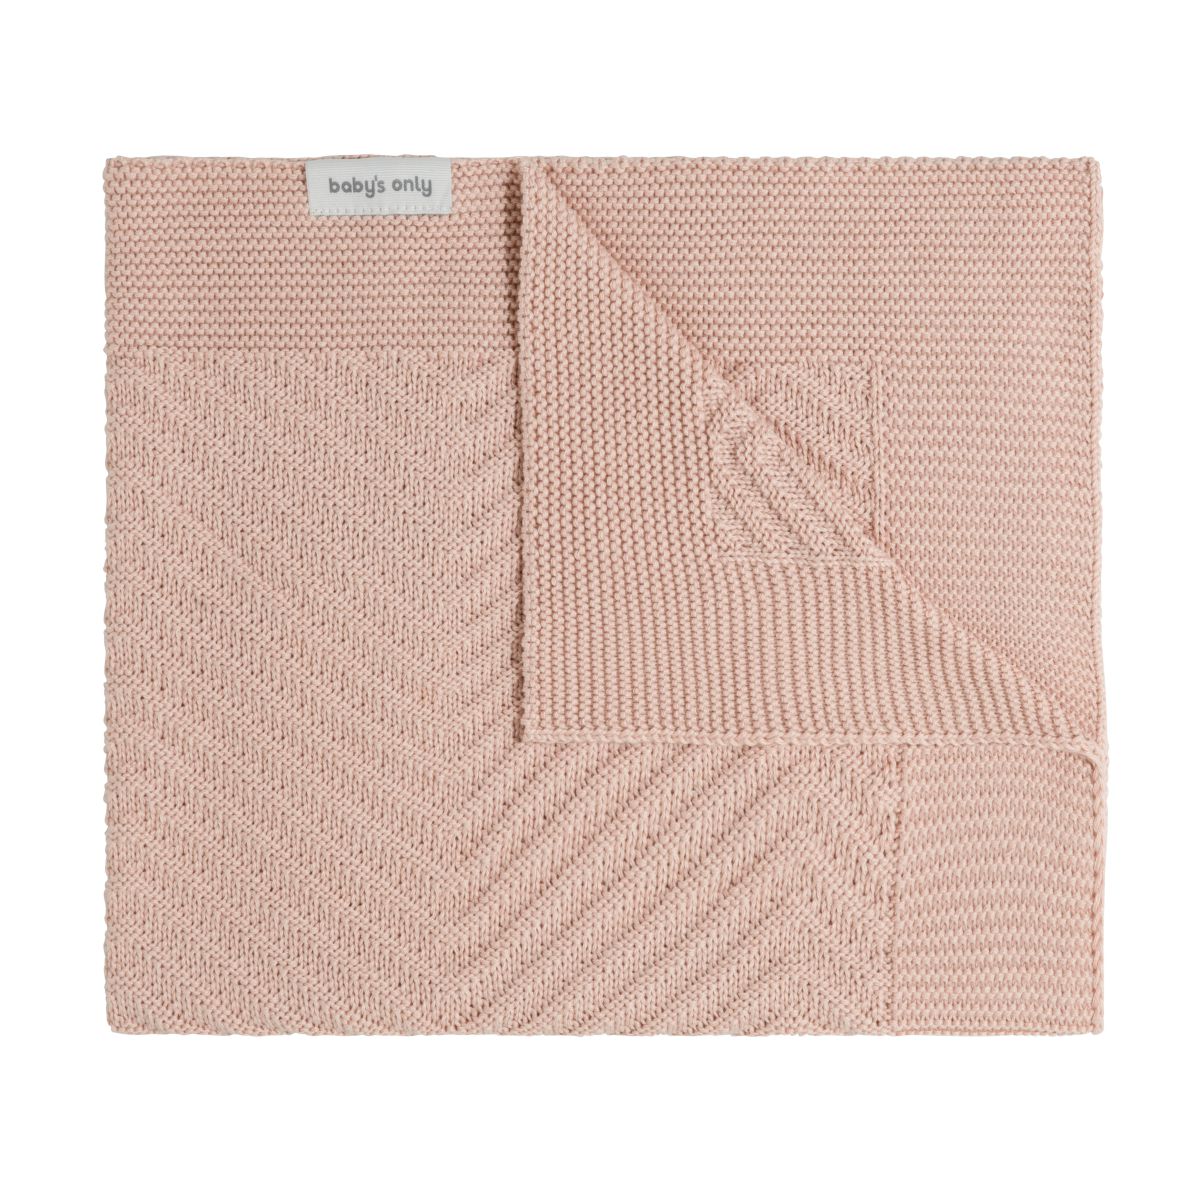 Baby's Only Cot Blanket Grace - 70x95 cm.